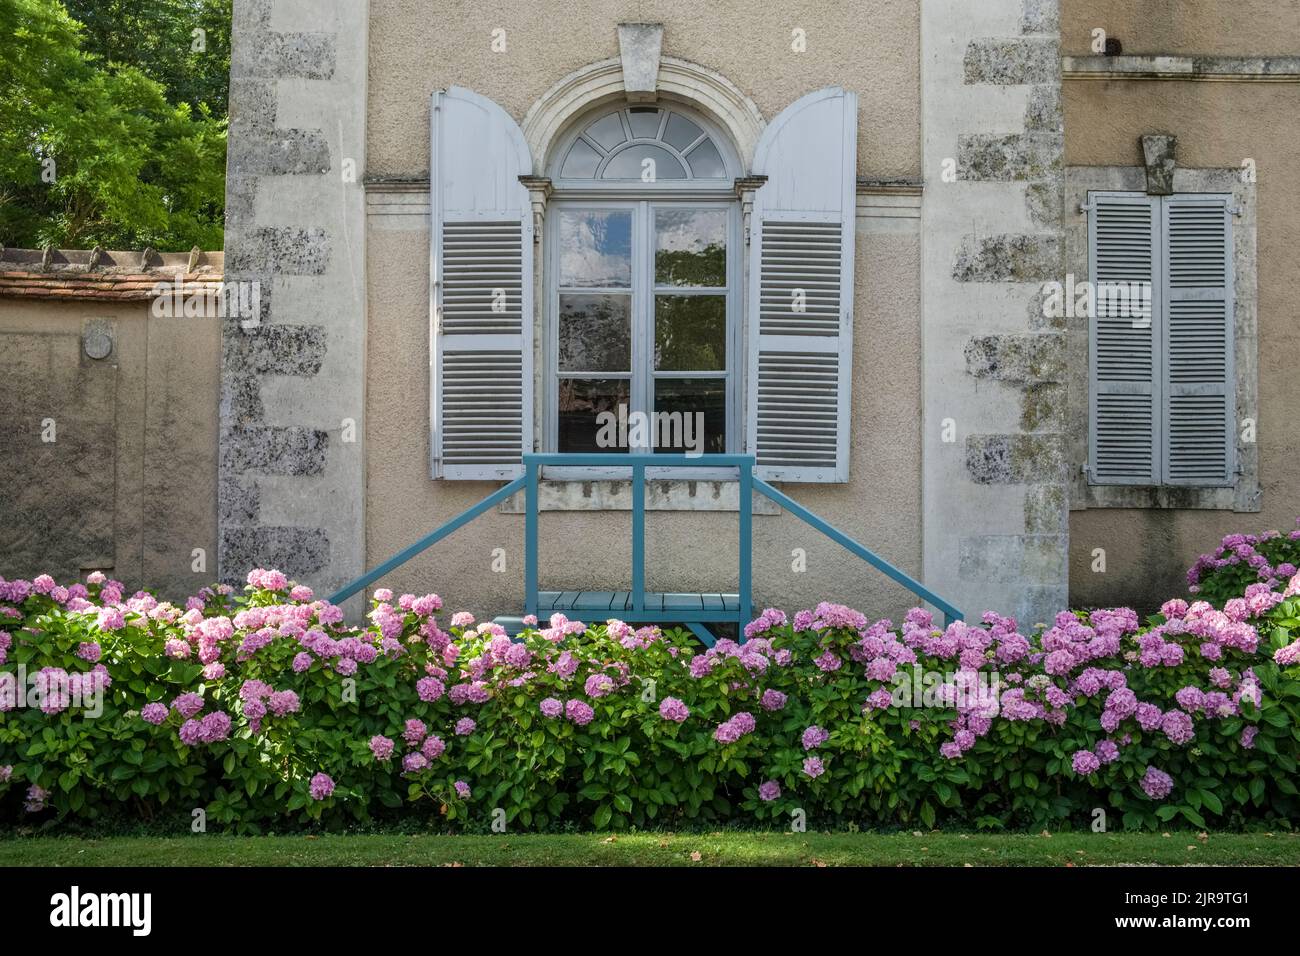 Nohant-Vic (central France): House of George Sand. The property is registered as a National Historic Landmark (French “Monument historique”) and the h Stock Photo